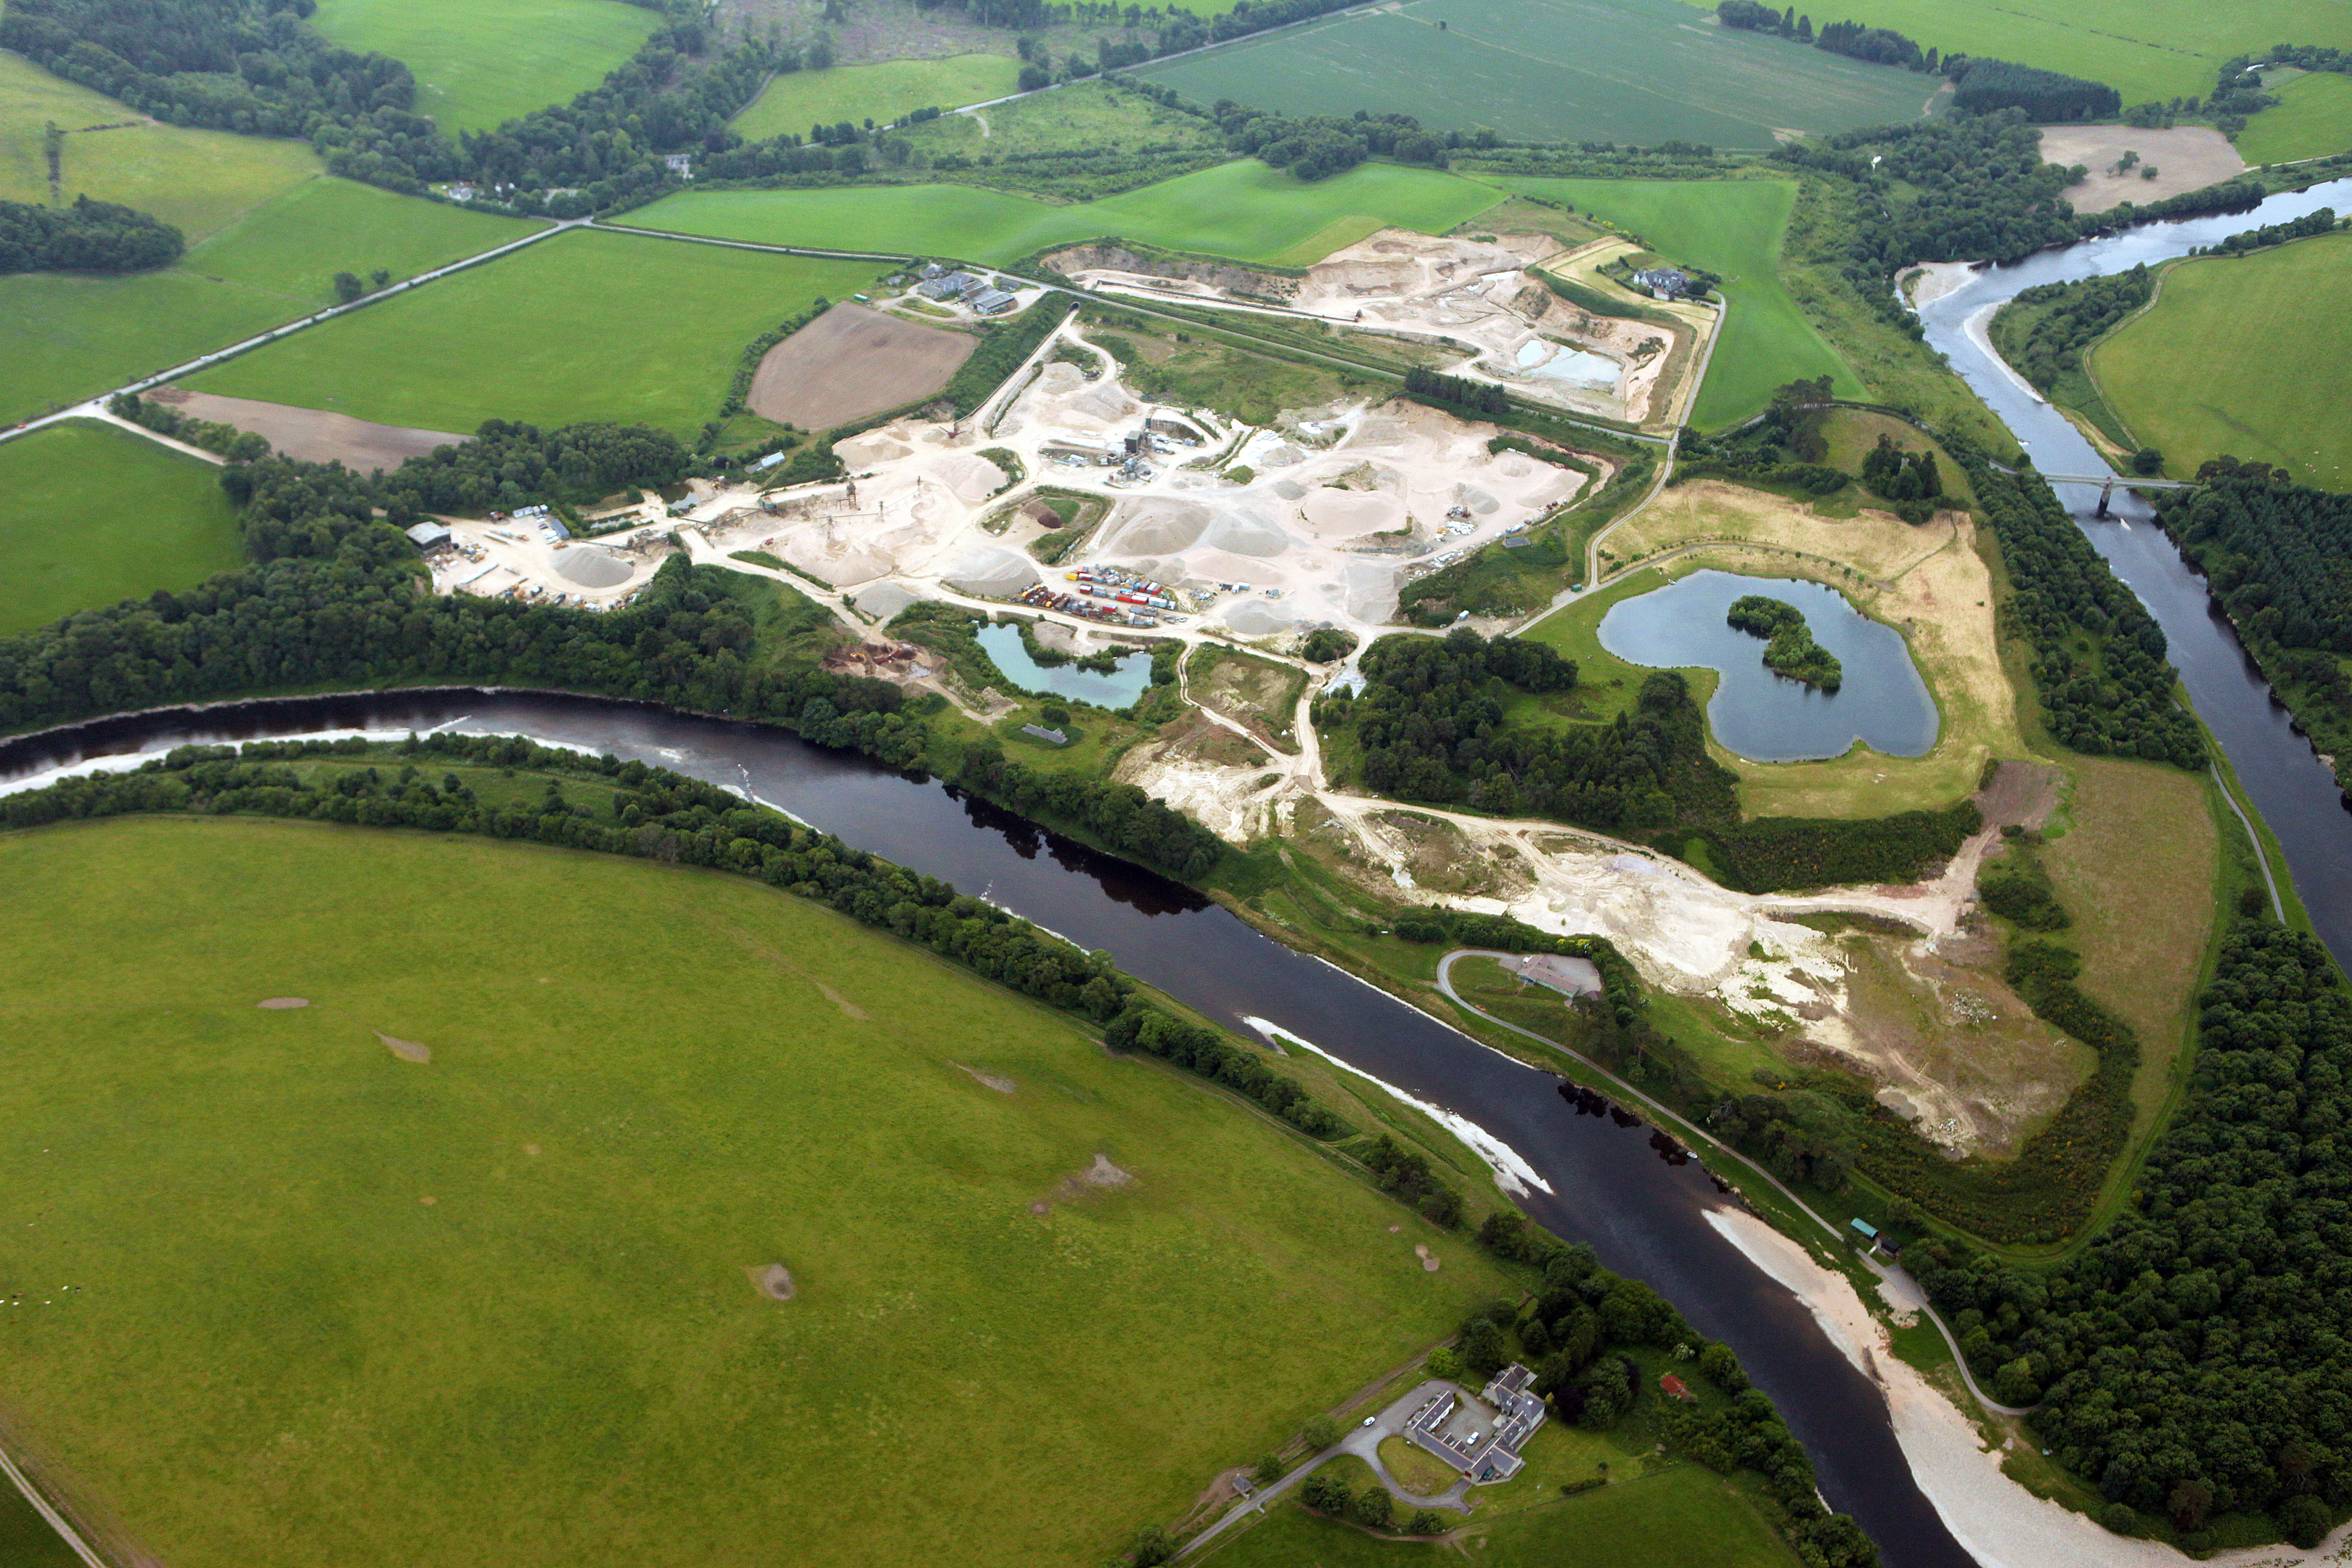 An aerial view of the existing Park Quarry near Drumoak